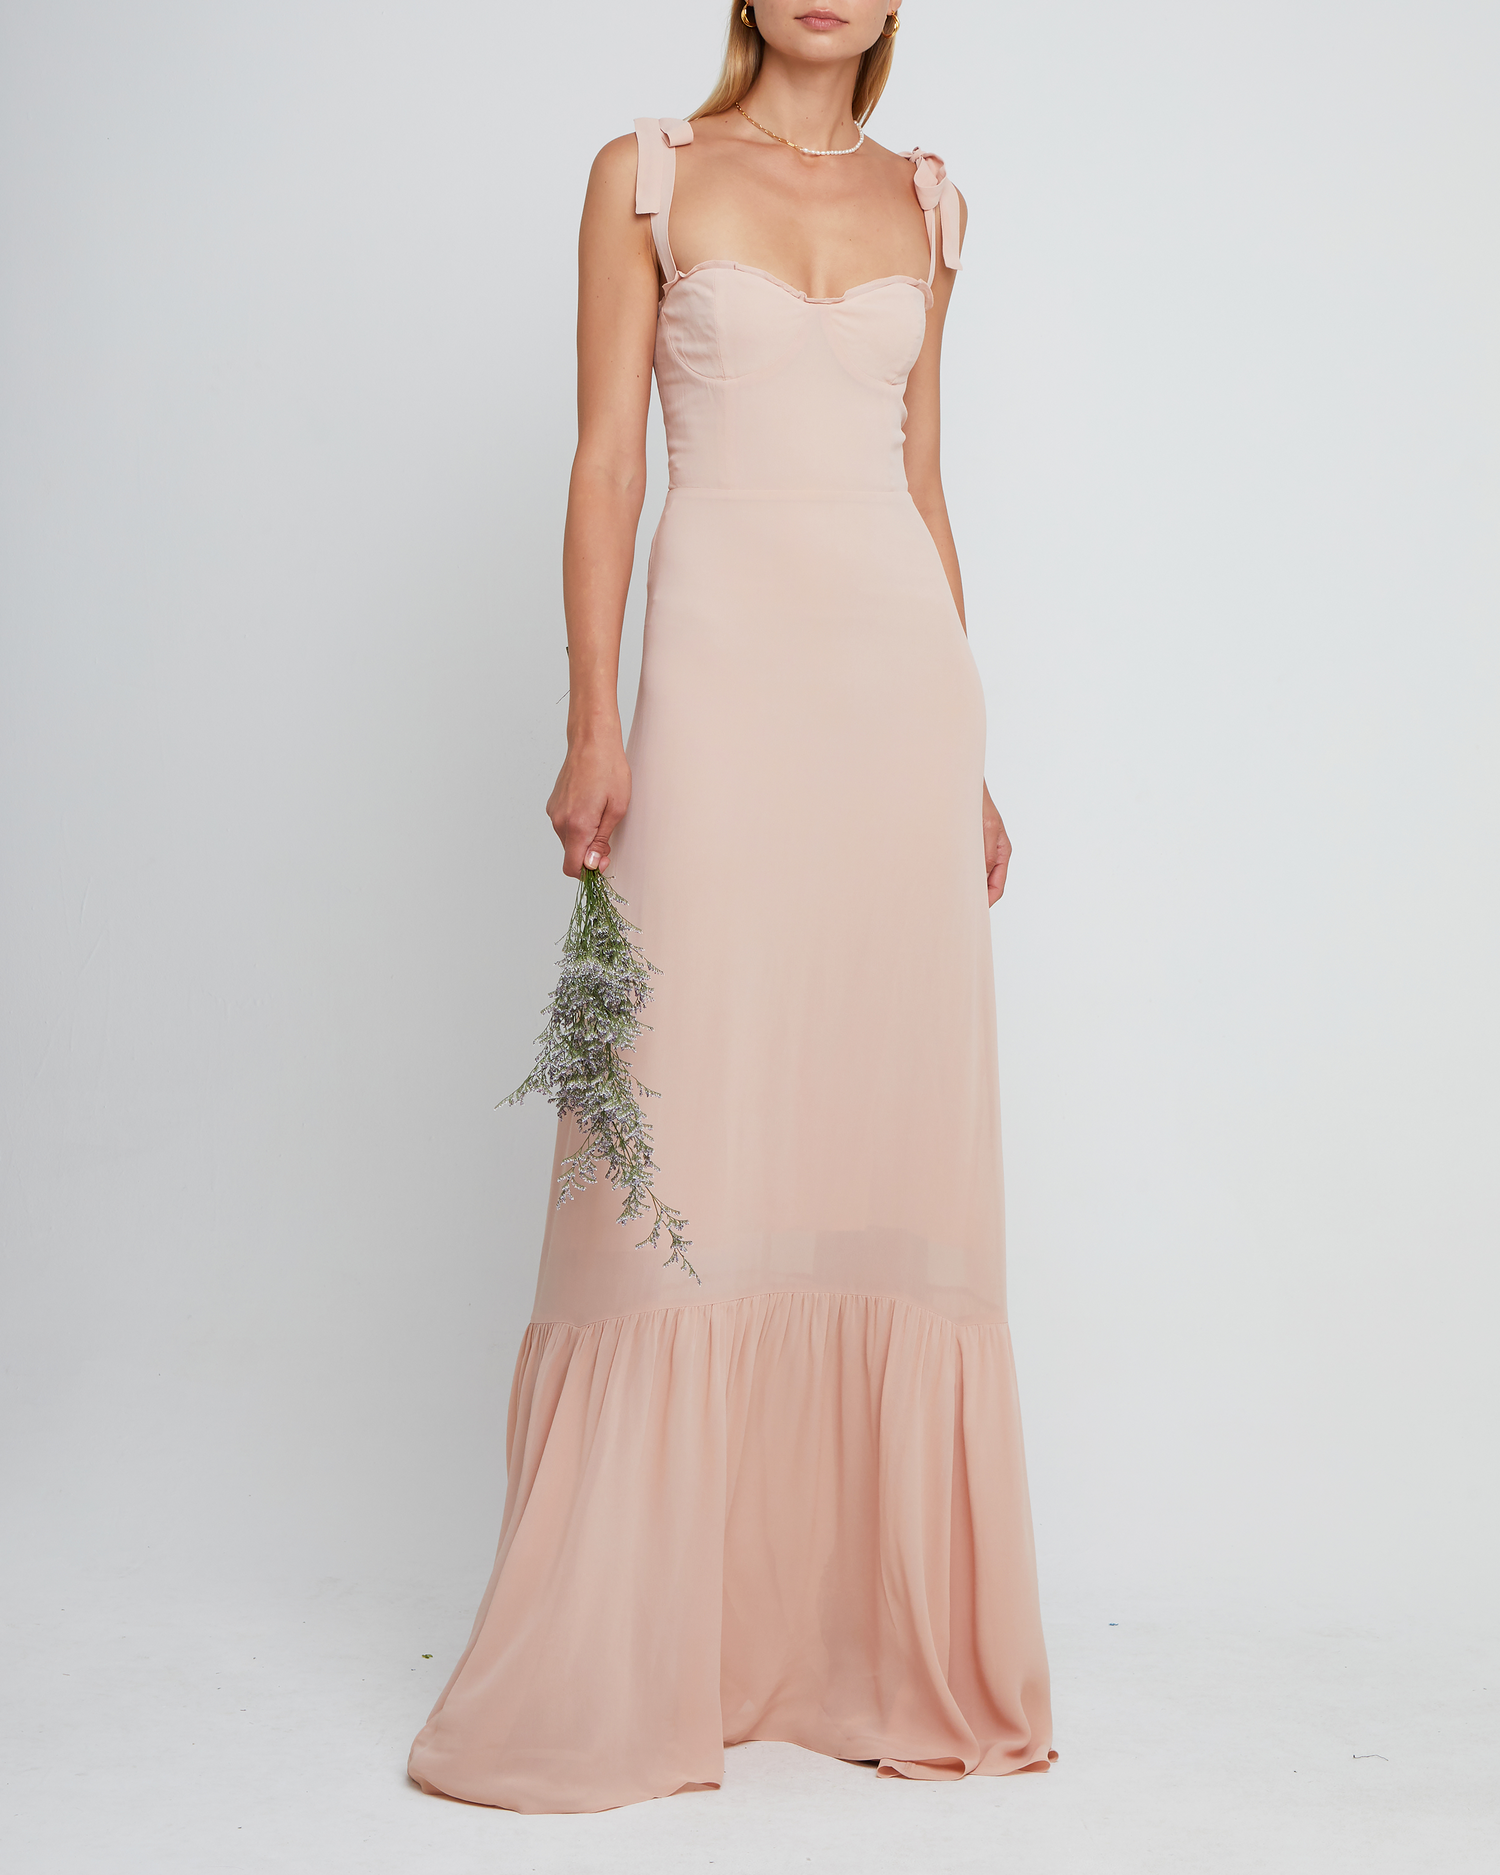 First image of La Rue Dress, a pink floor-length bridesmaid dress with adjustable tie straps, cup detail, neckline ruffles, tiered skirt, lining, back smocking and back zipper